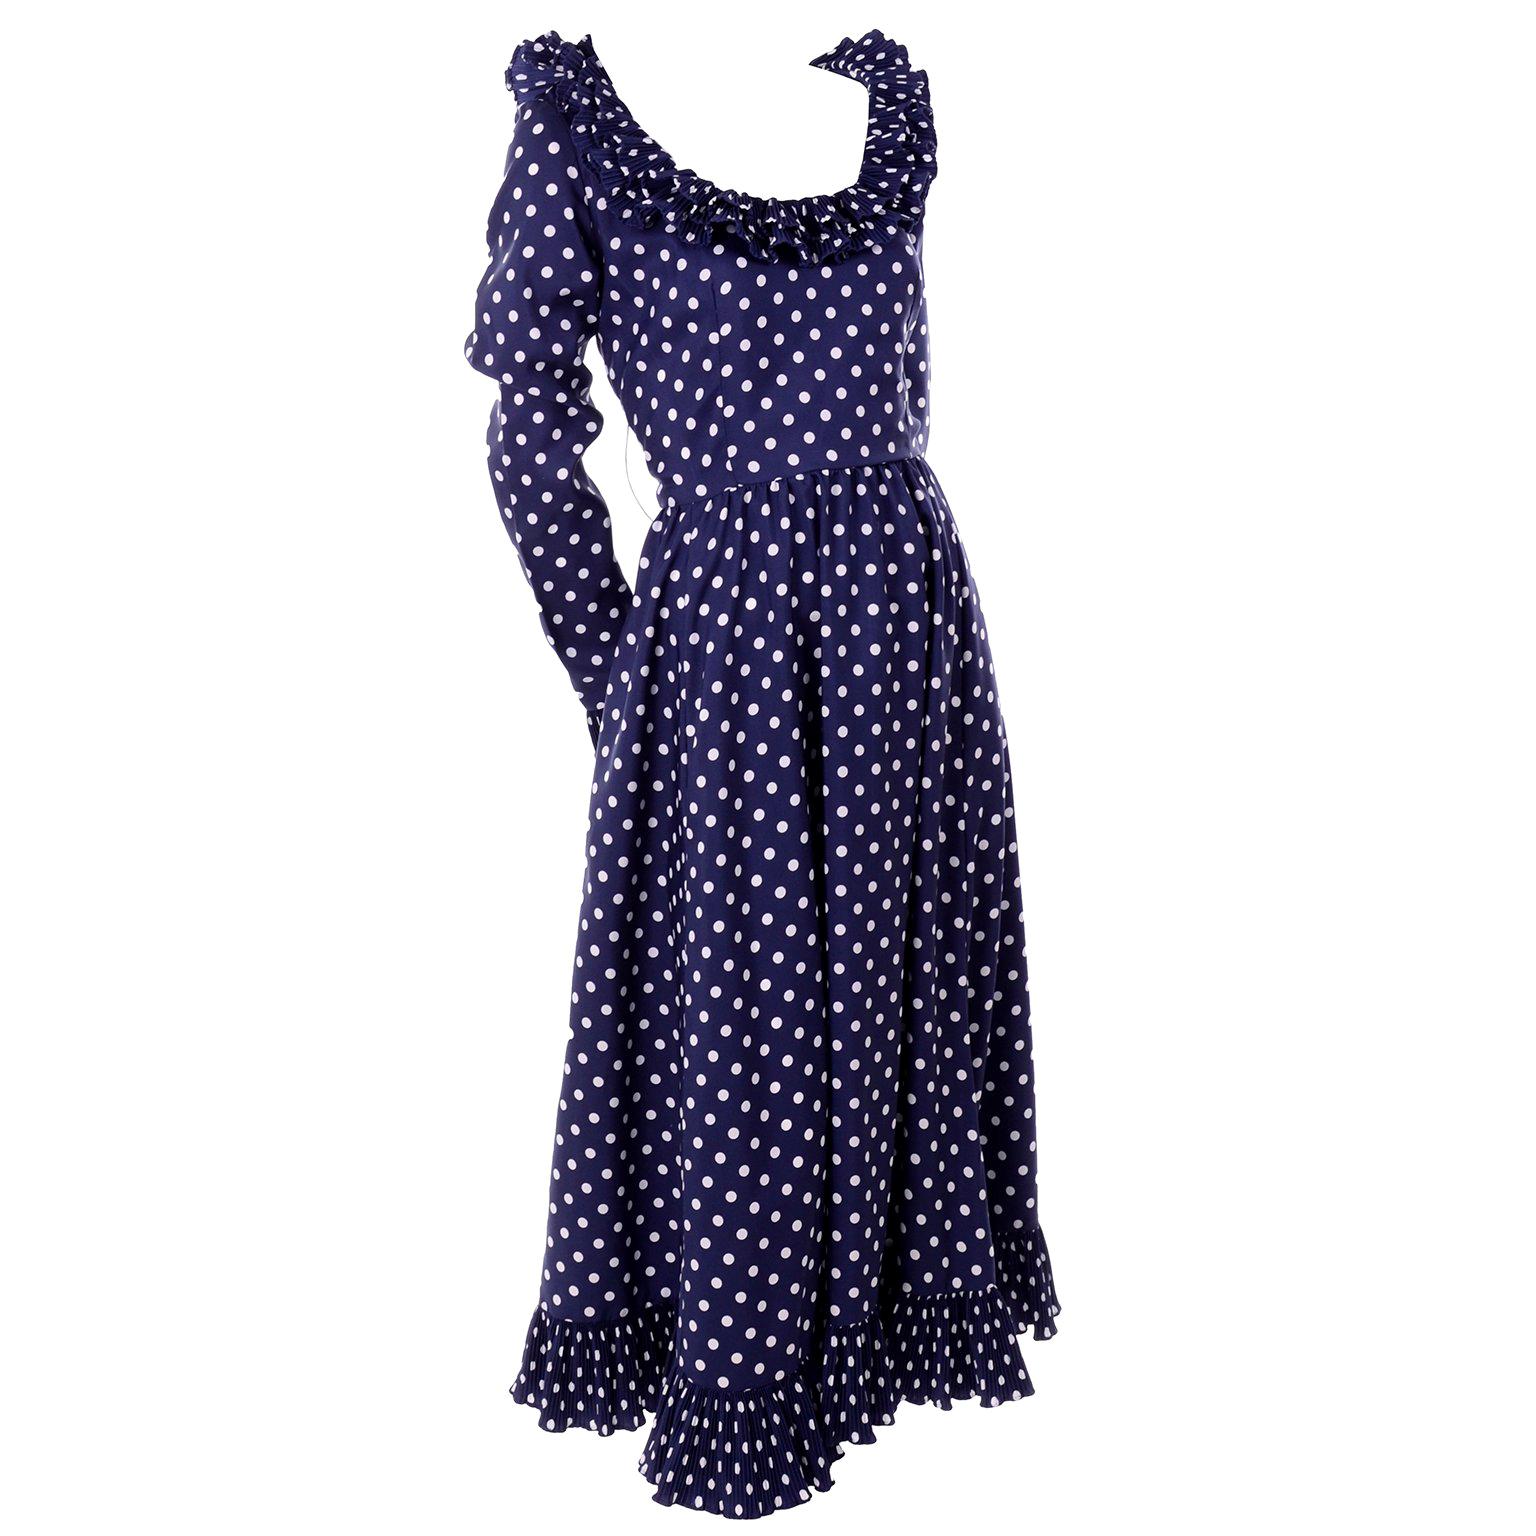 1970s Victor Costa Navy Blue & White Polka Dot Vintage Dress With Ruffles